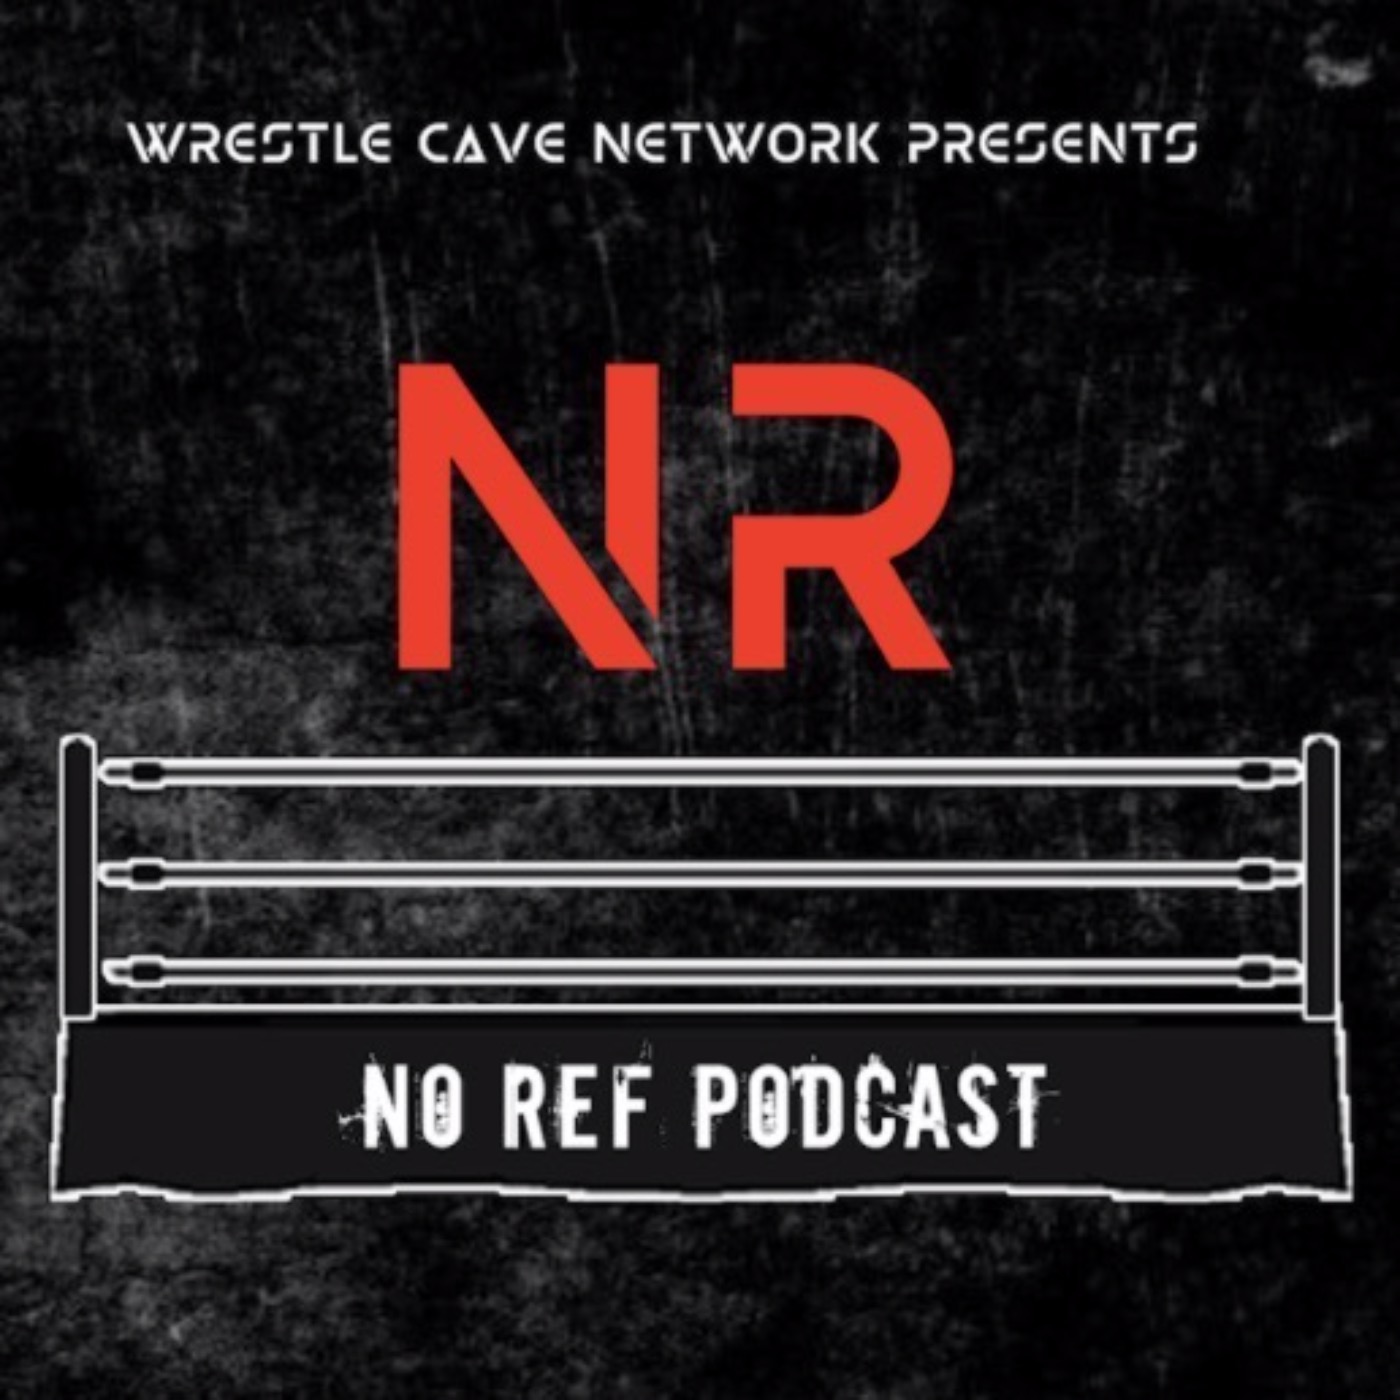 No Ref Podcast: Season 3 Debut "The Boys Are Back!"